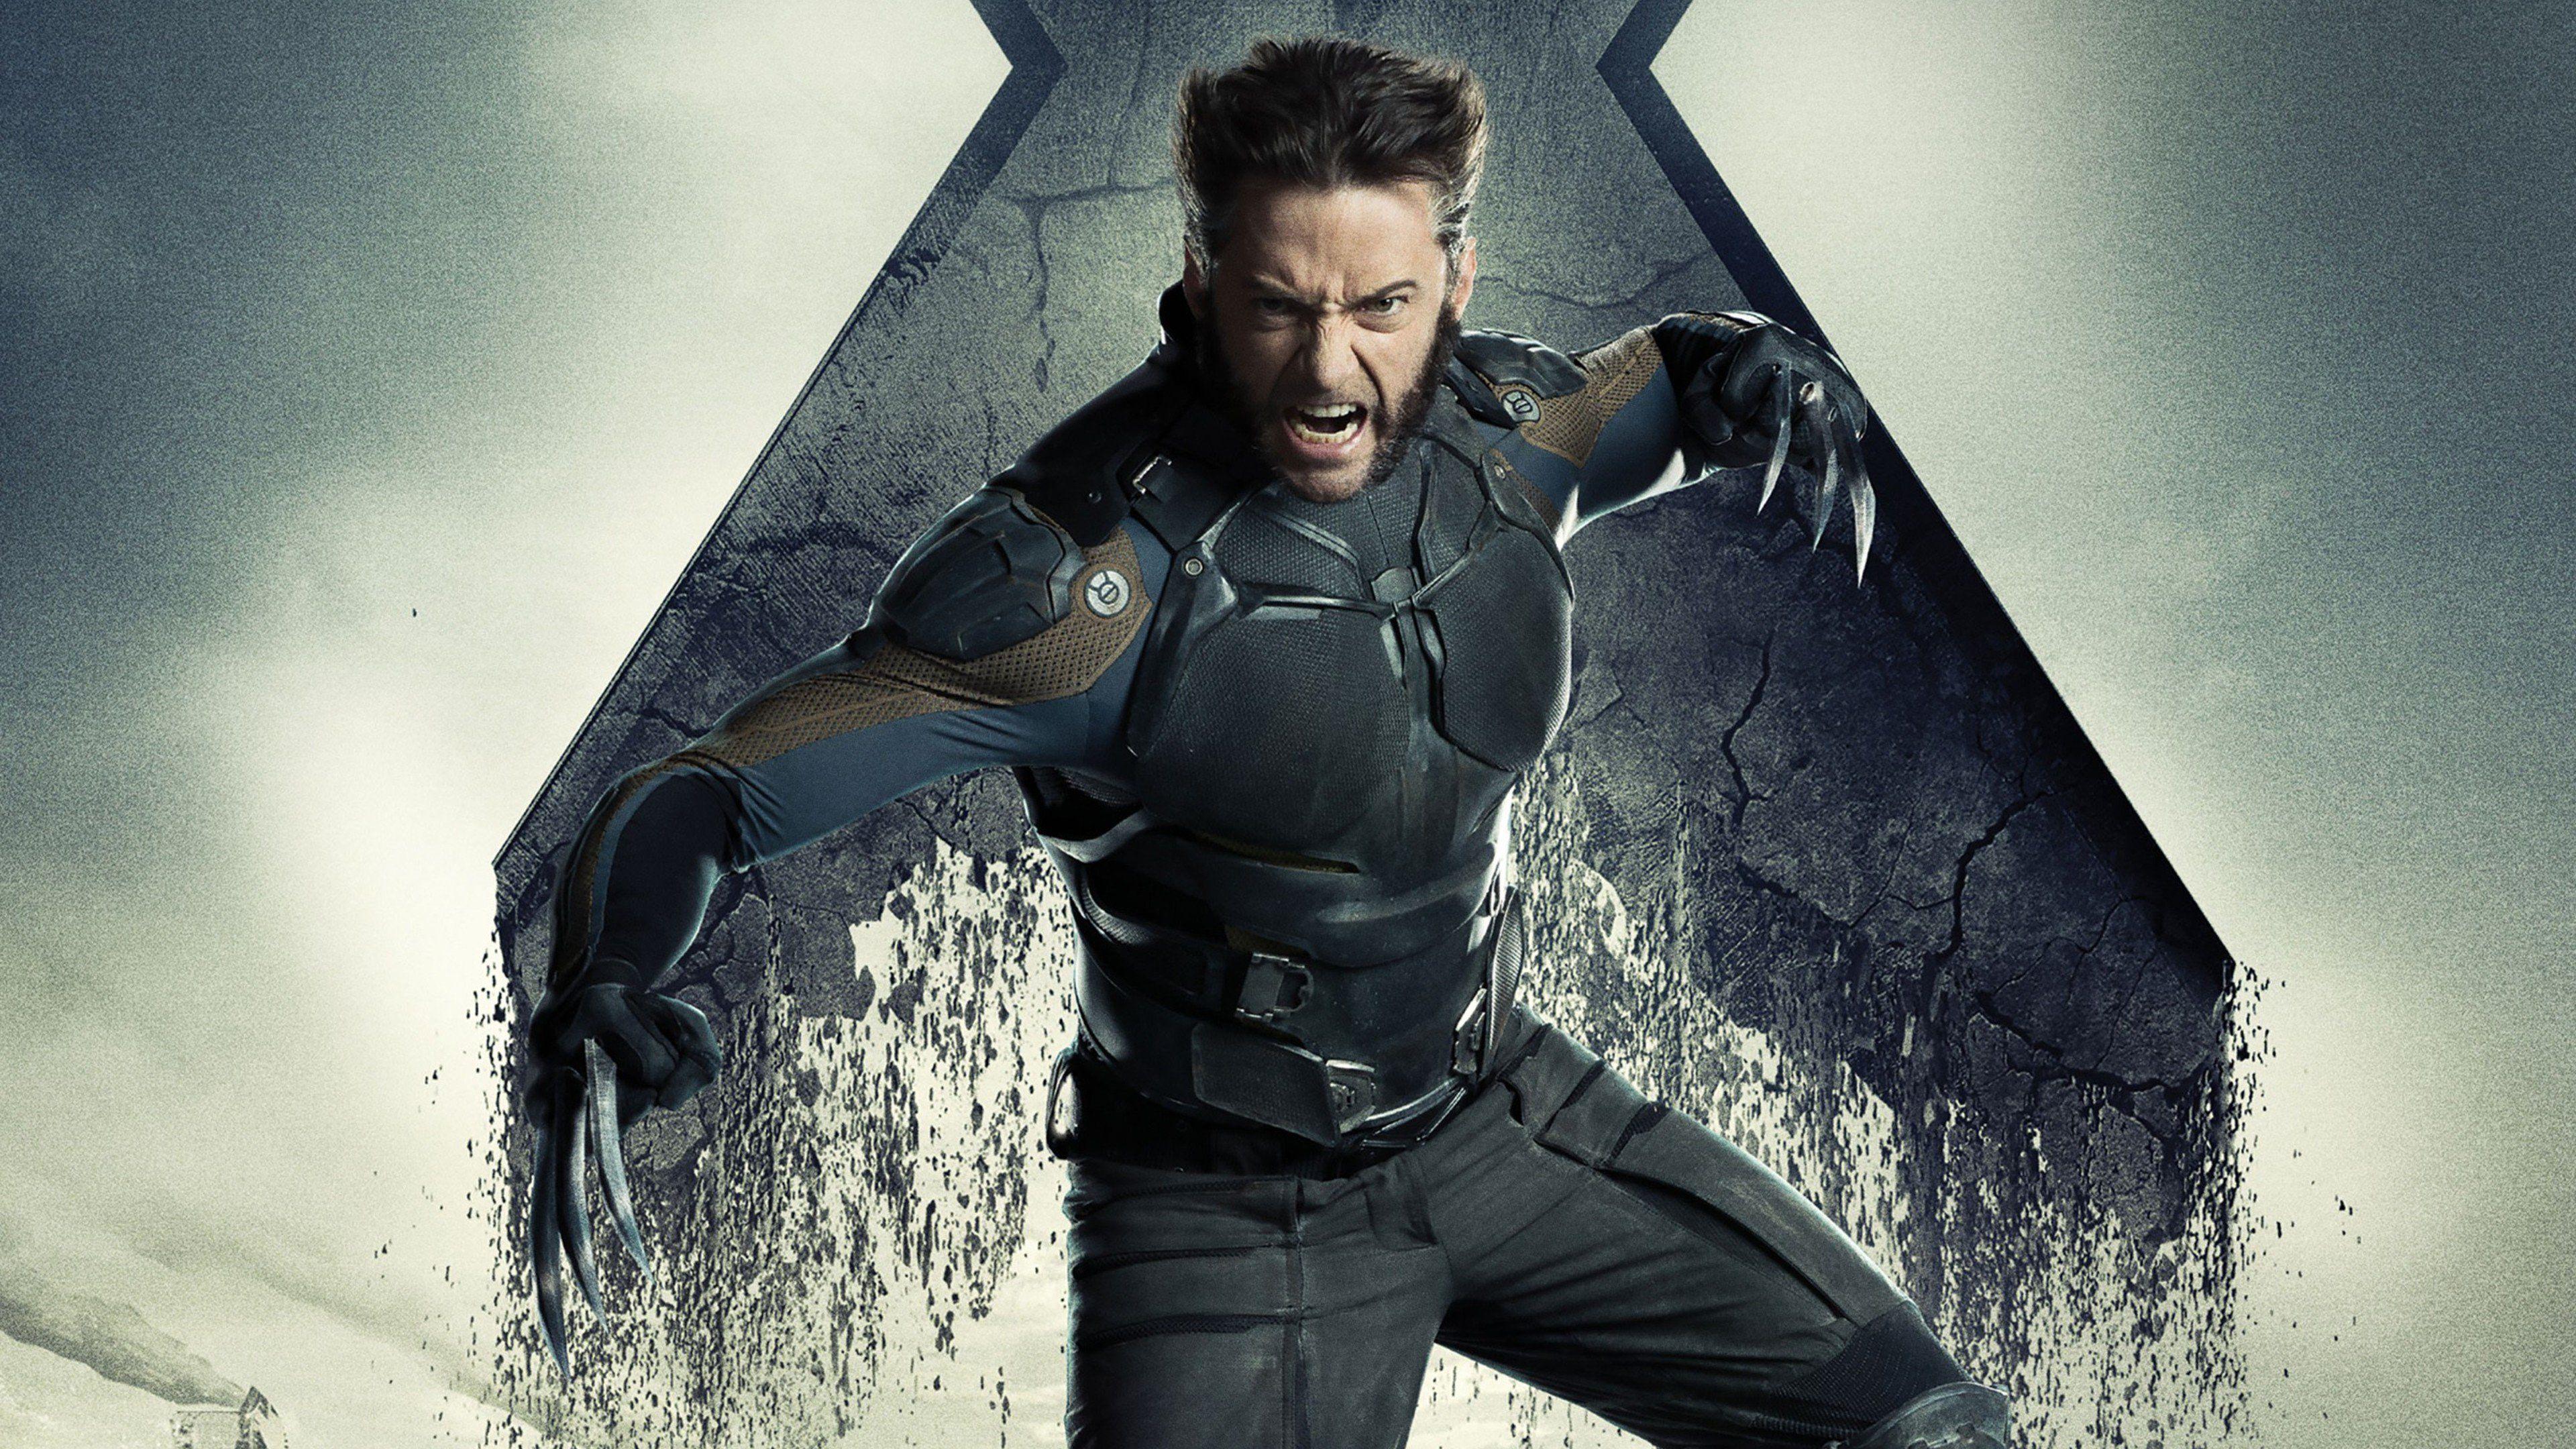 X Men Days Of Future Past High Quality Wallpapers : Movie Wallpapers